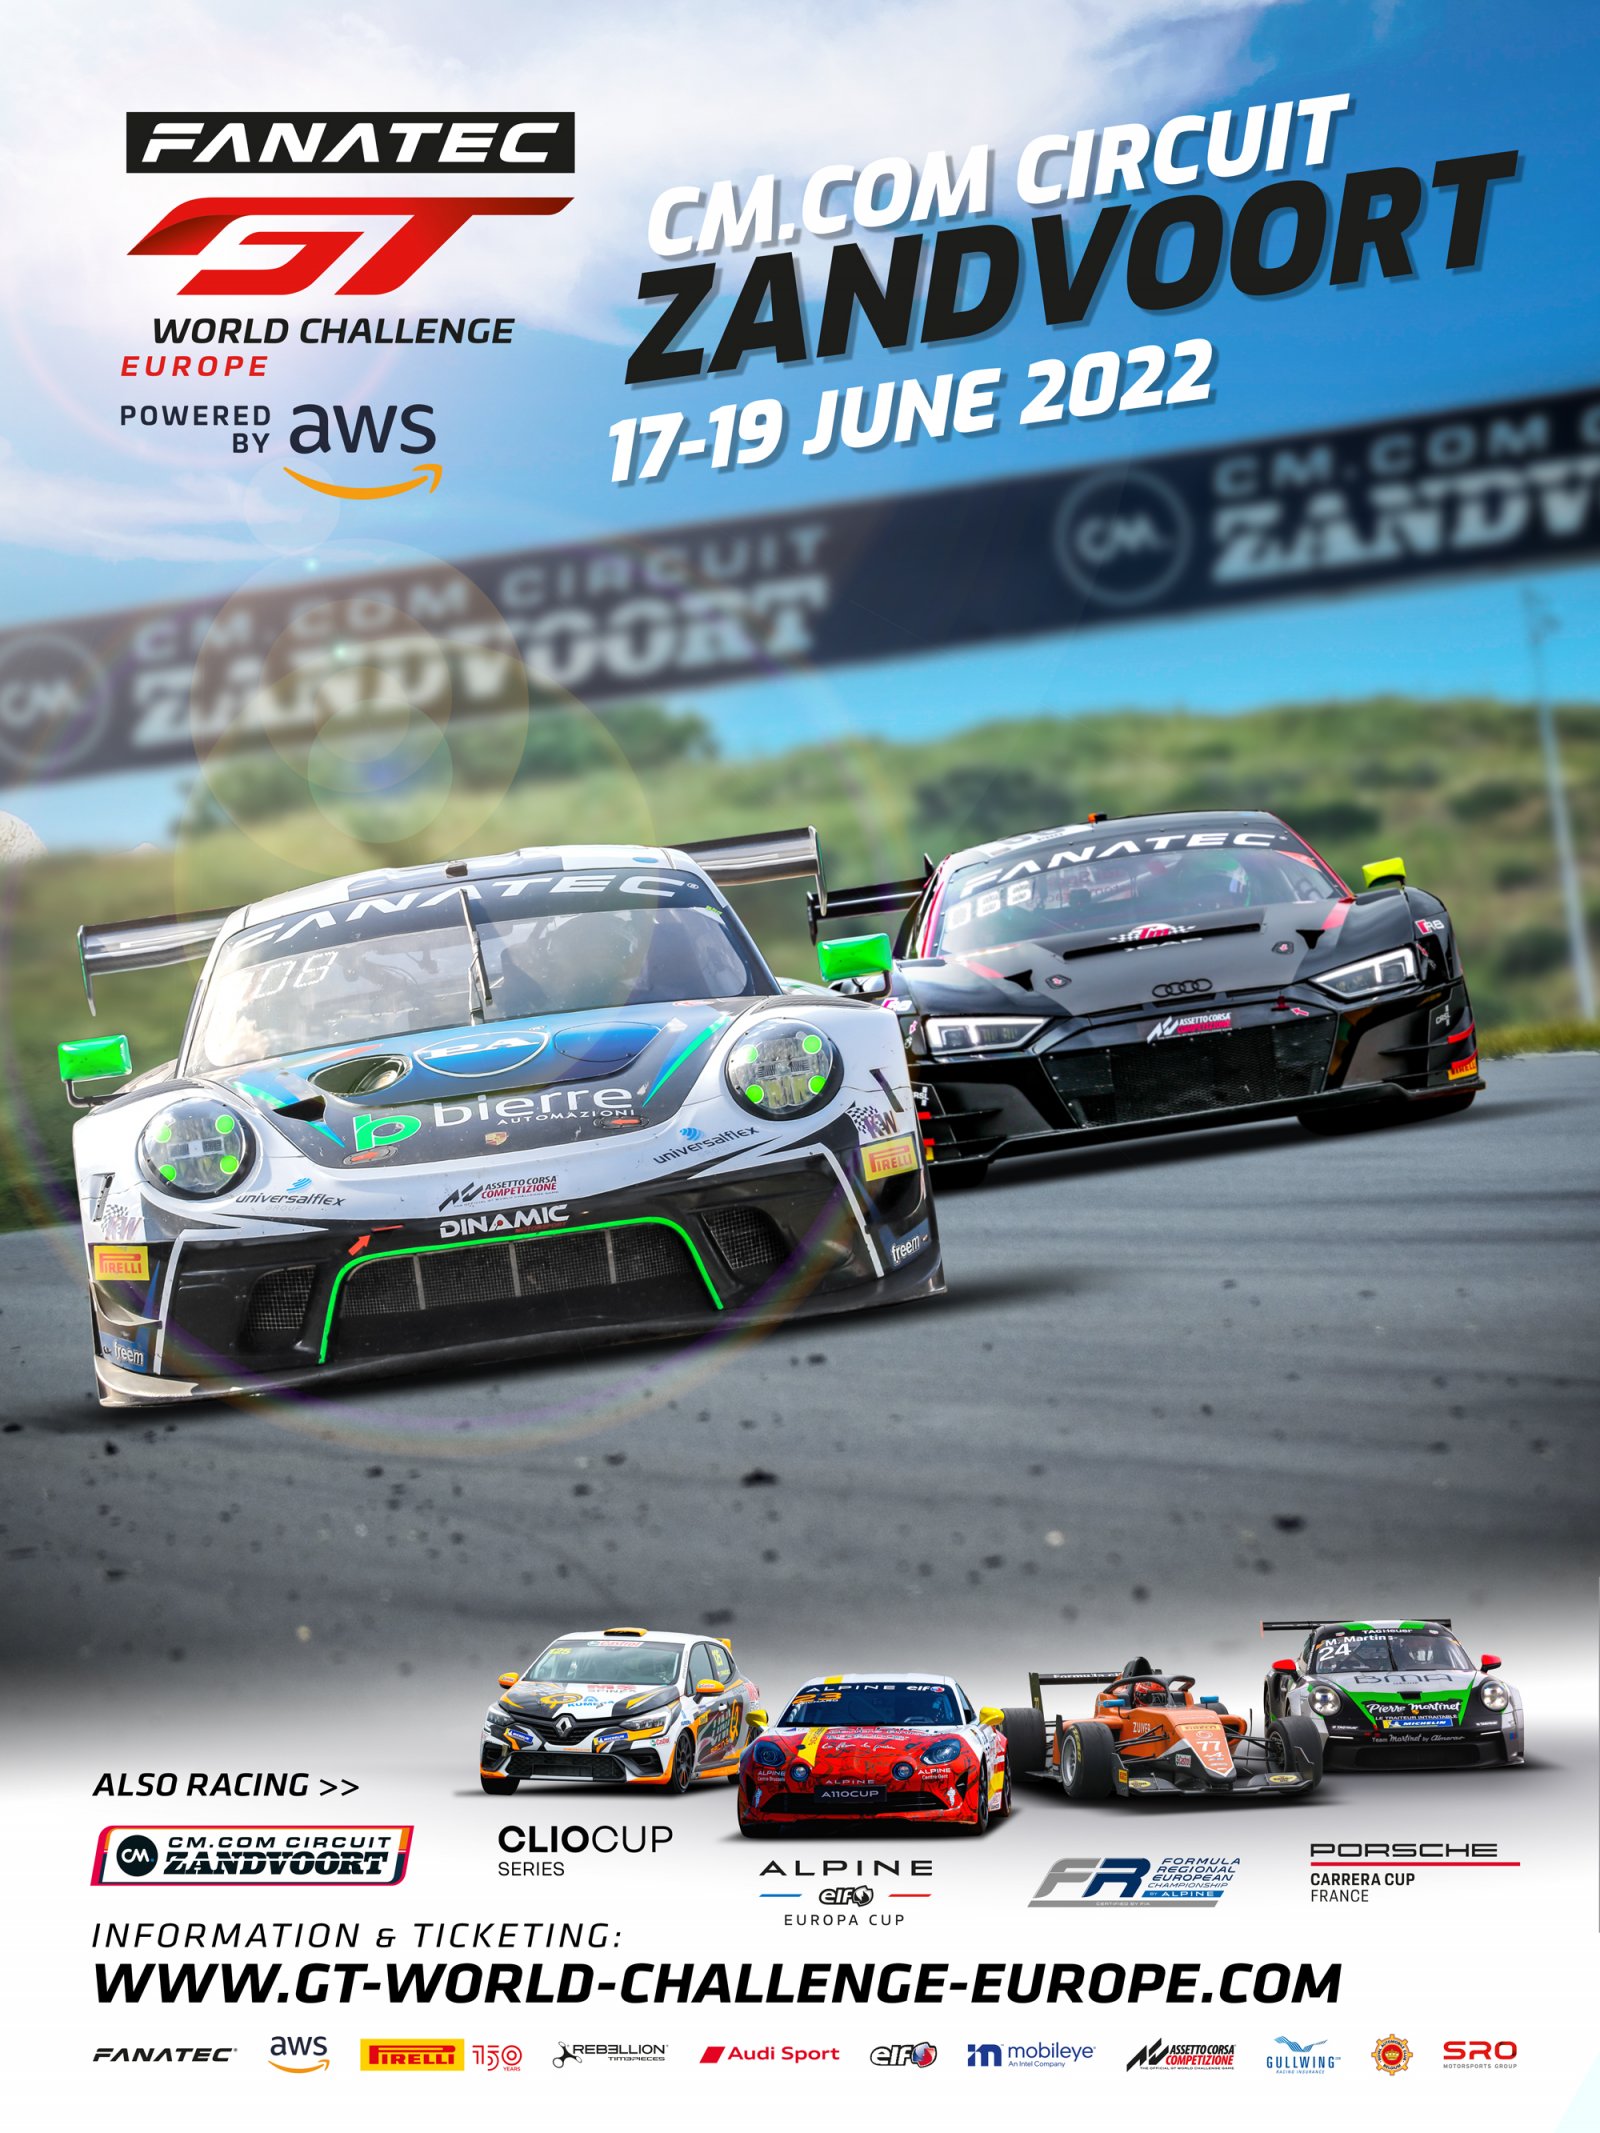 Fanatec GT World Challenge Europe Powered by AWS title battle intensifies with mid-season trip to Zandvoort